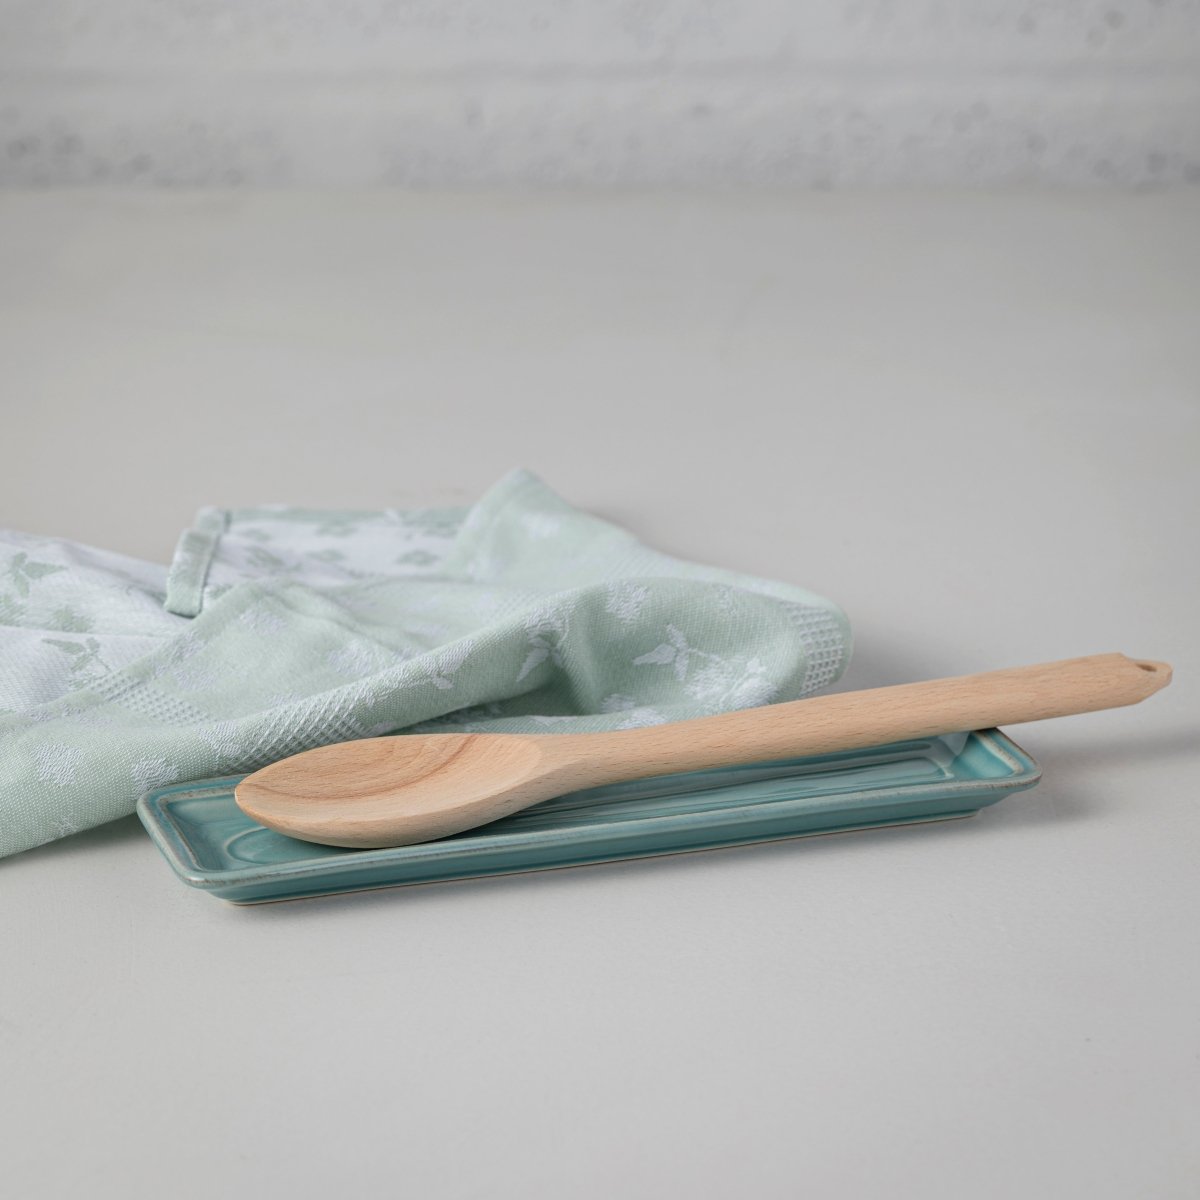 Casafina FONTANA SPOON REST Turquoise